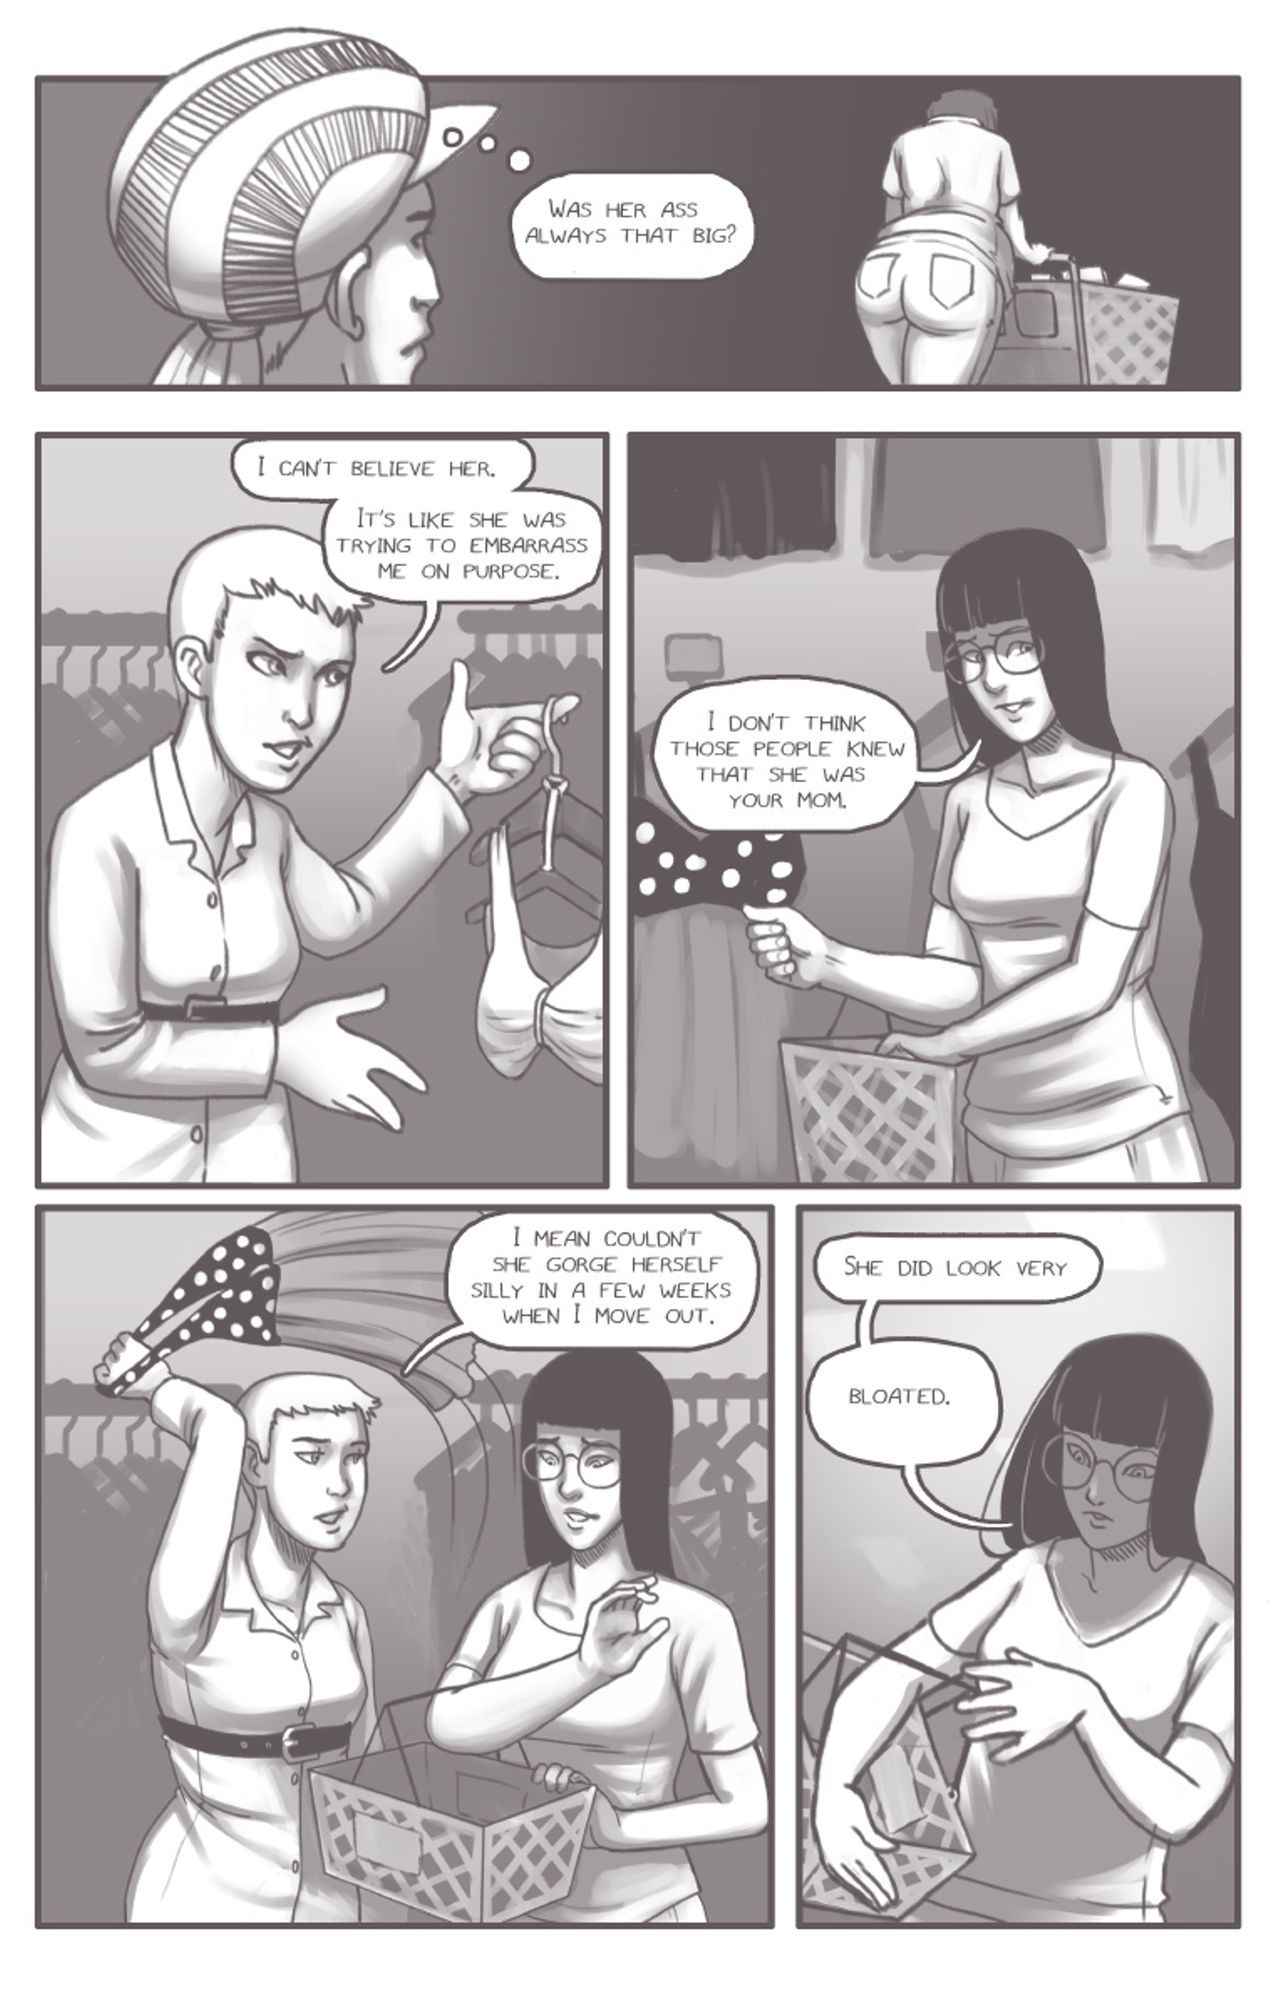 [Olympic-Dames] Alien Pregnancy Expansion Comic Updated (Ongoing) 21